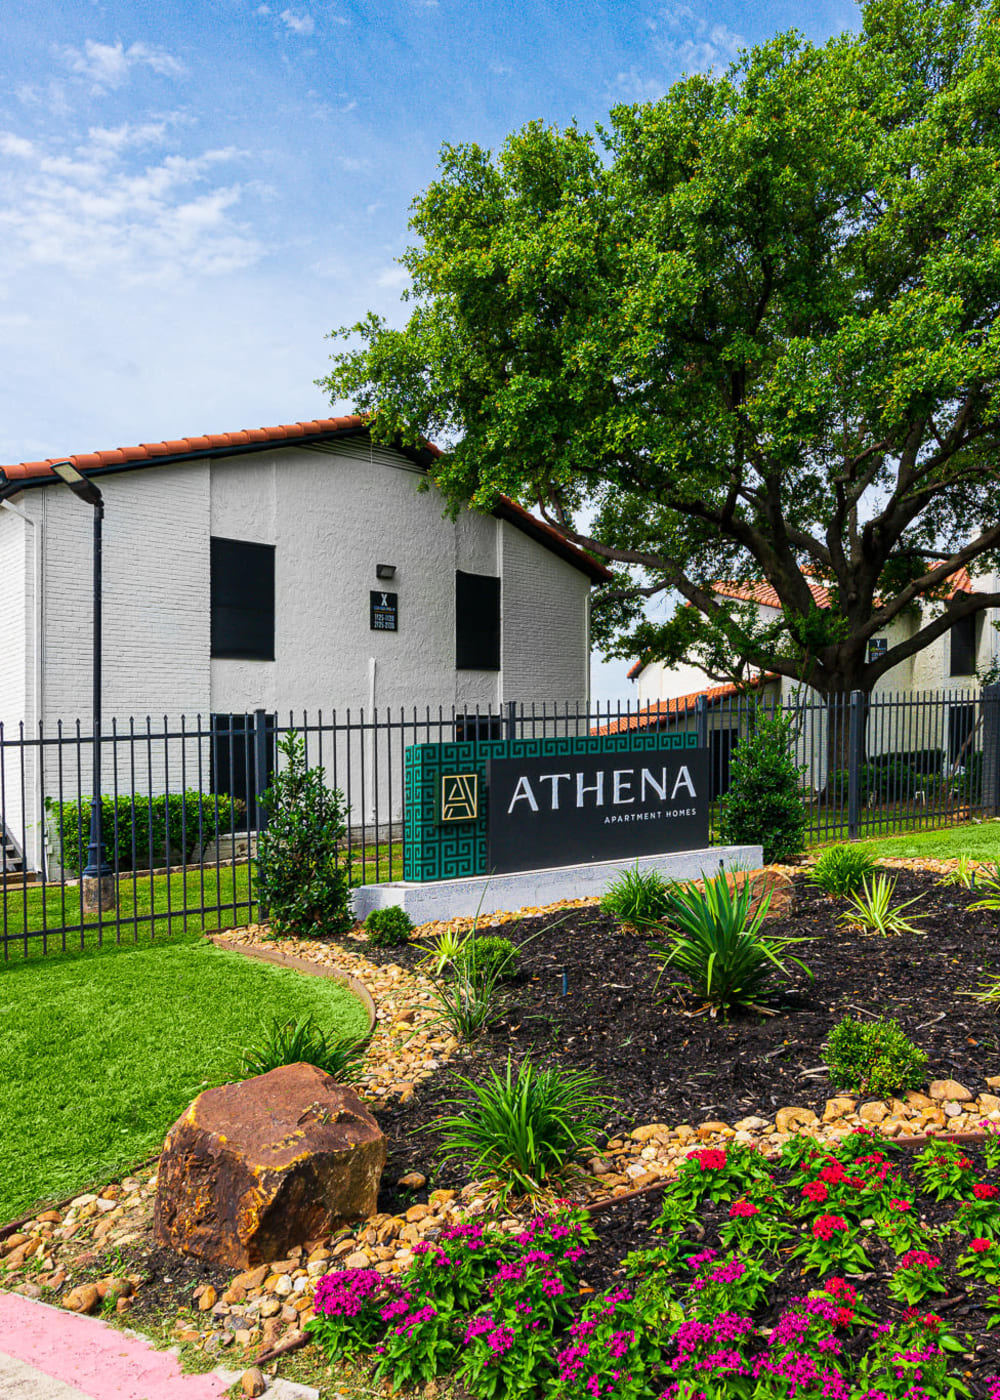 Landscaped entrance sign at Athena Apartment Homes in Benbrook, Texas